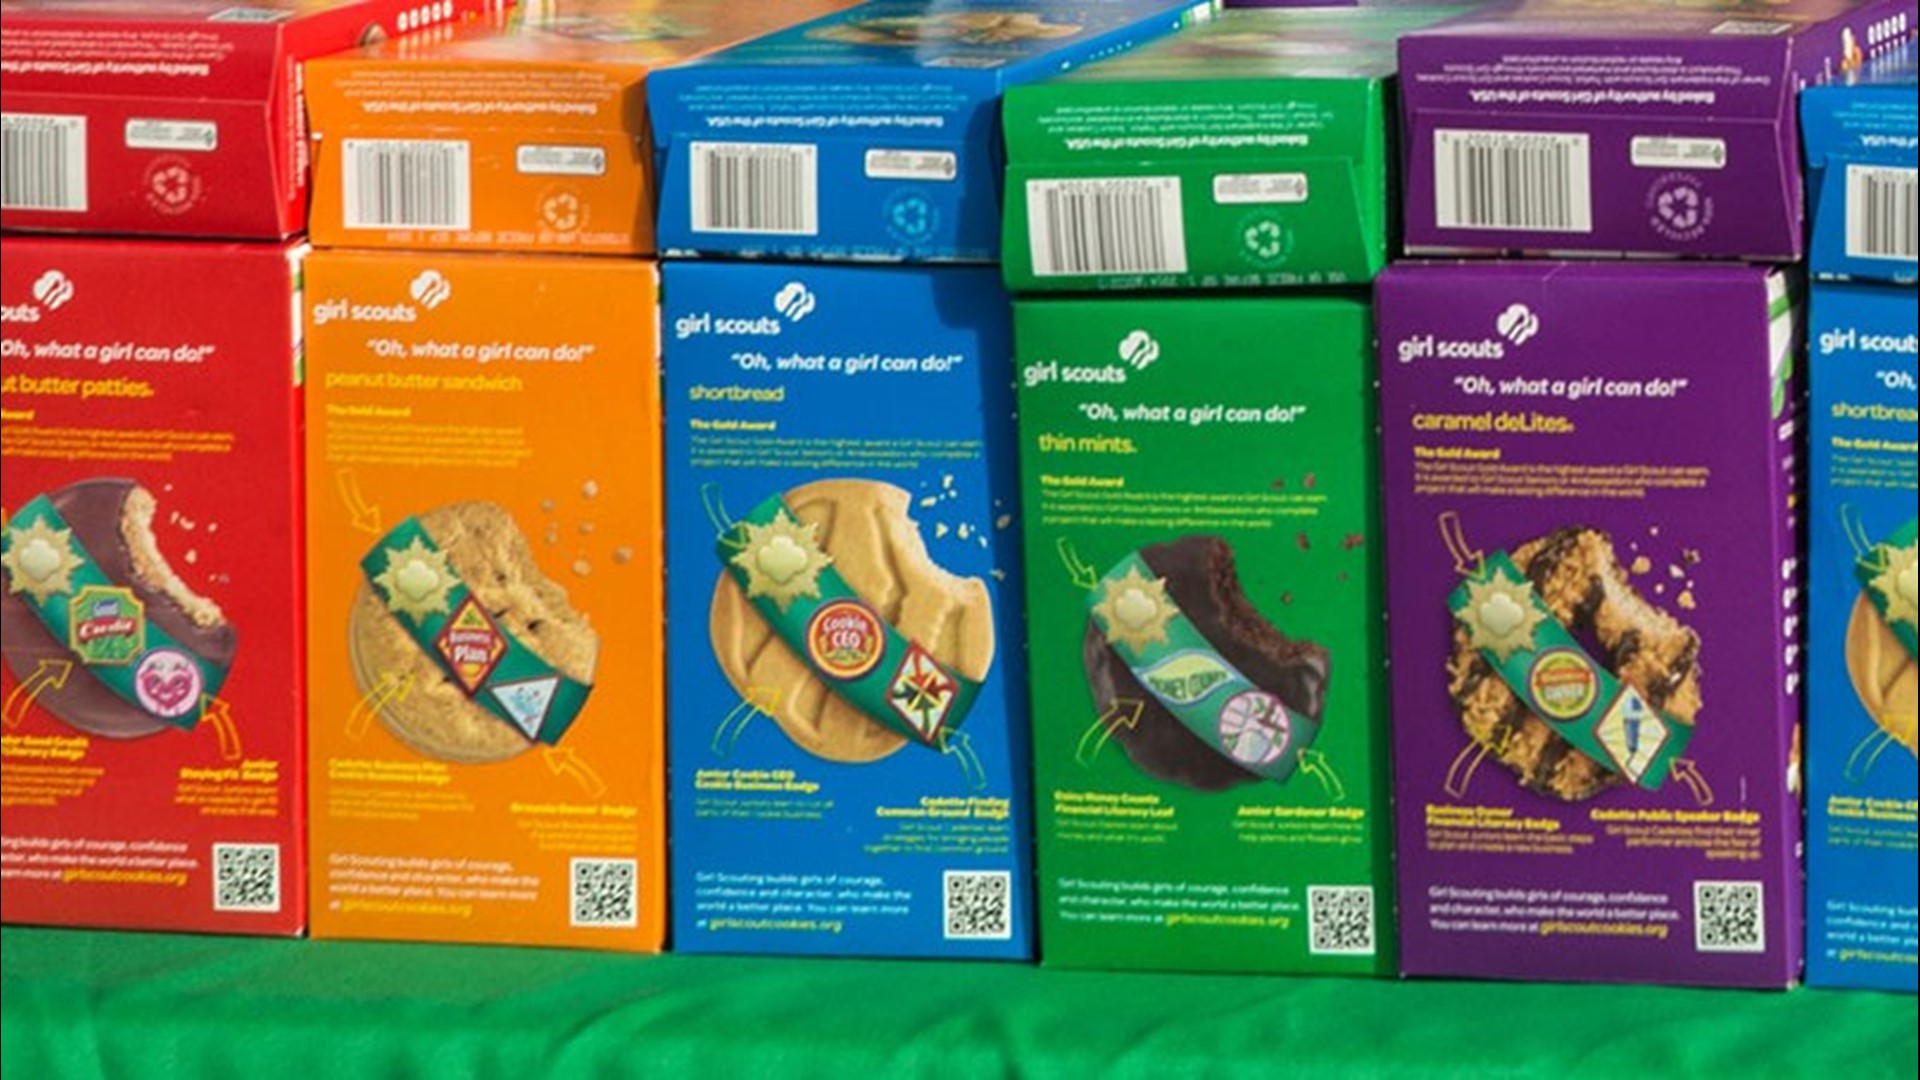 There are obvious concerns with the pandemic, and Girl Scouts of Central Indiana is taking steps to help make sure purchasers feel safe.